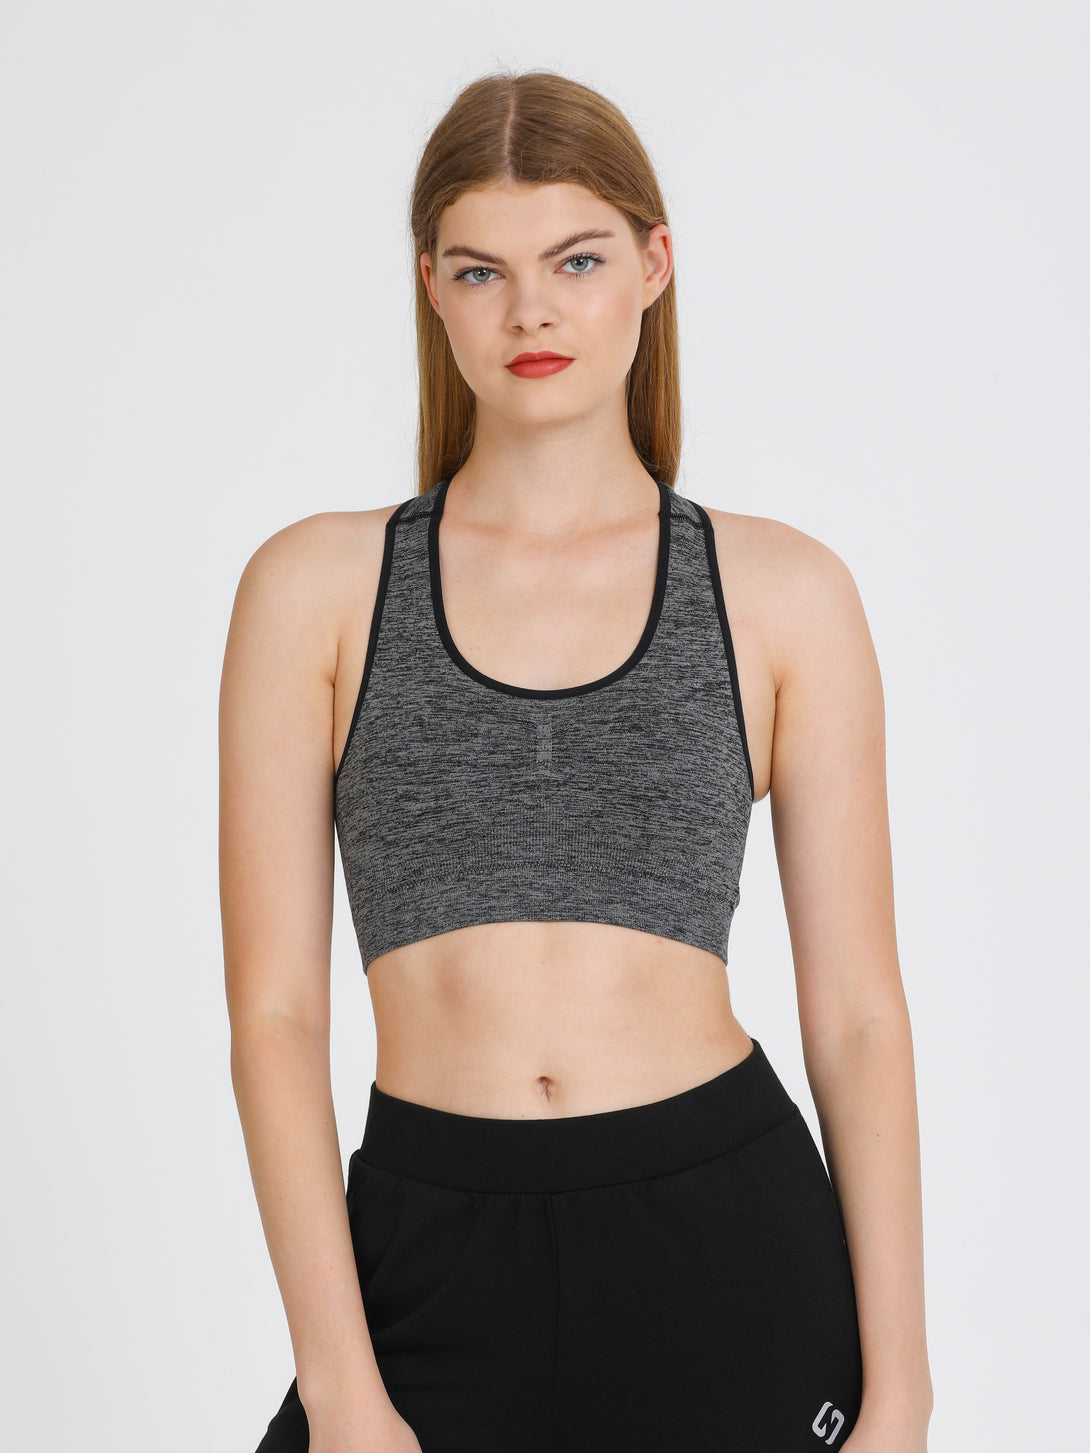 A Woman Wearing Black Color Seamless Medium Support Sports Bra